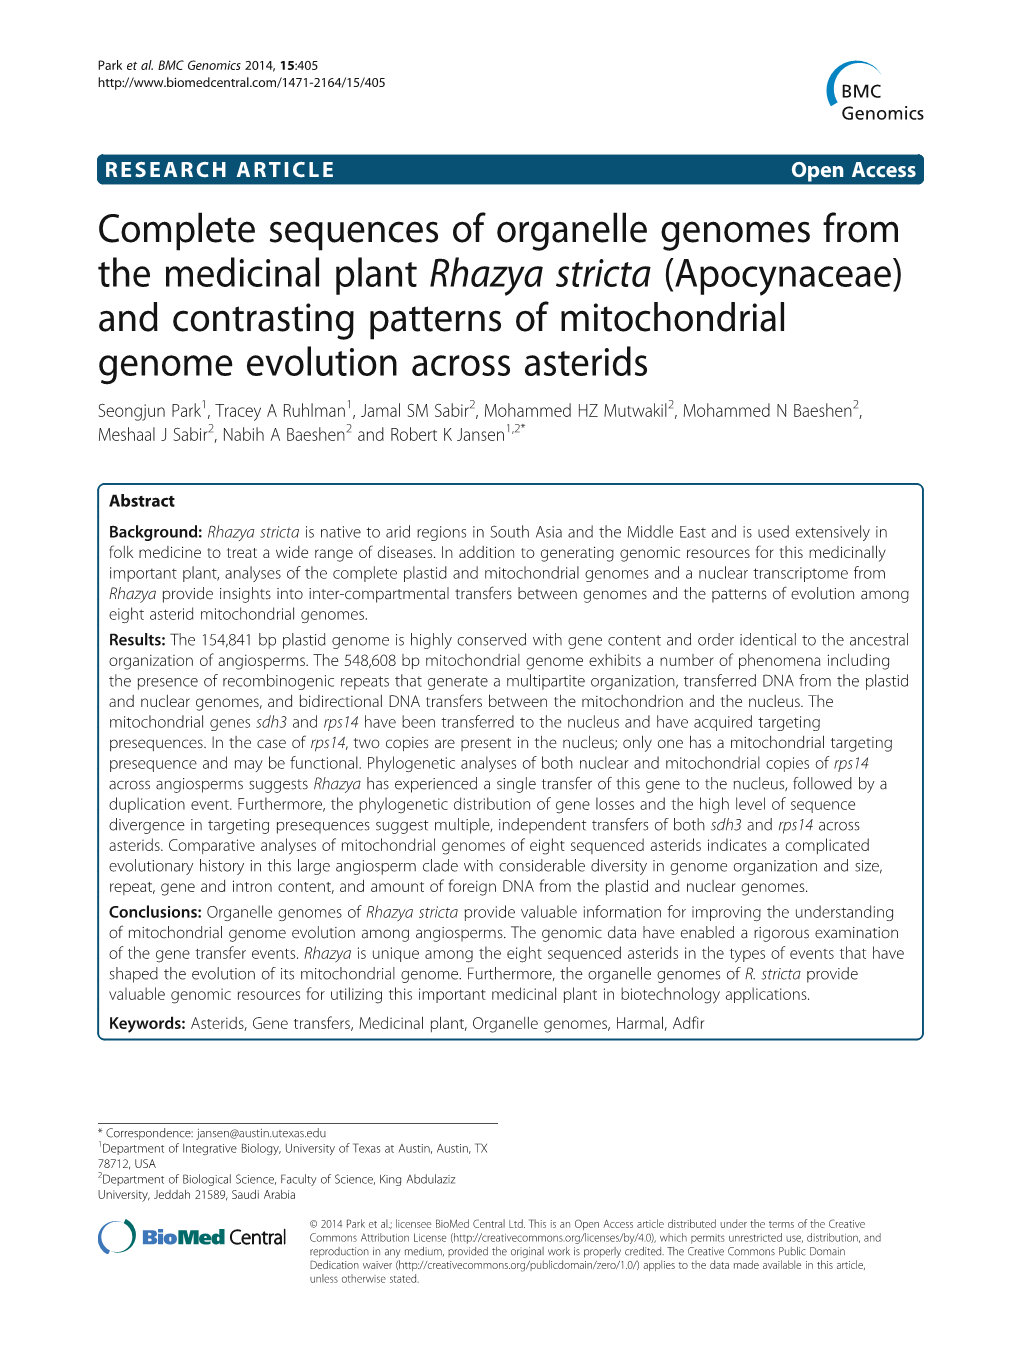 Complete Sequences of Organelle Genomes from the Medicinal Plant Rhazya Stricta